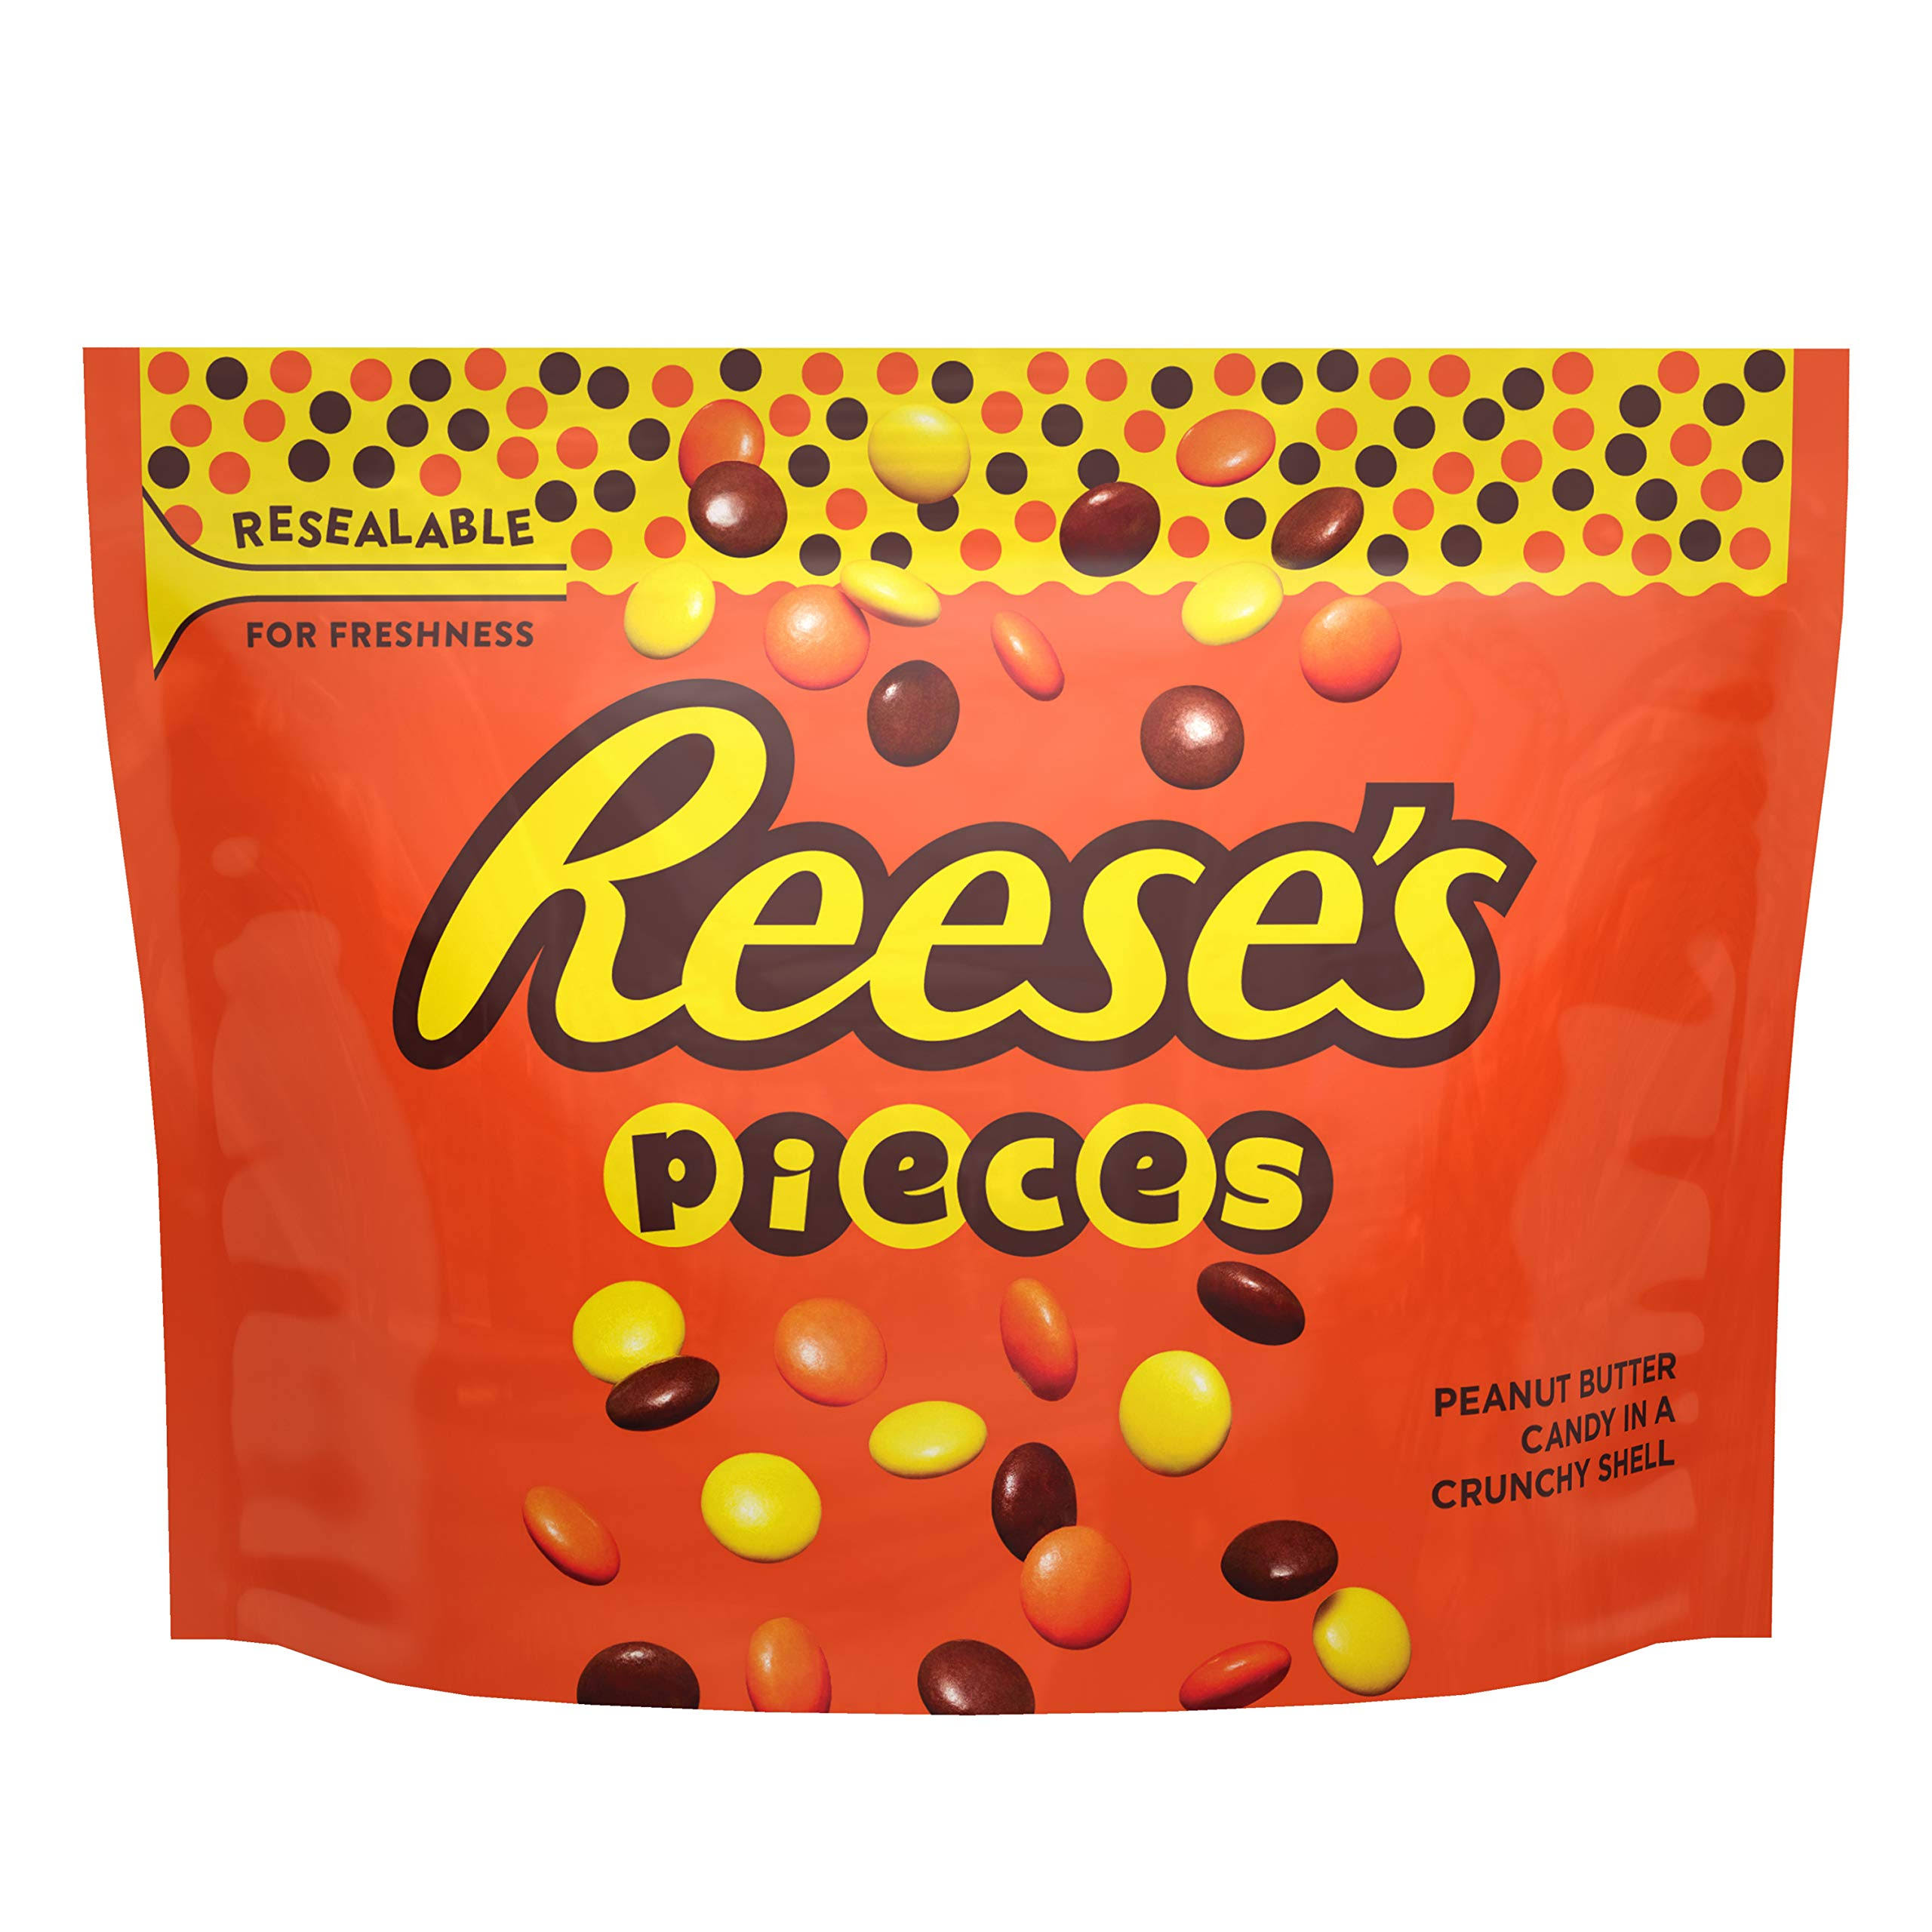 Reese's Pieces Chocolate Peanut Butter Candy - 9.9oz